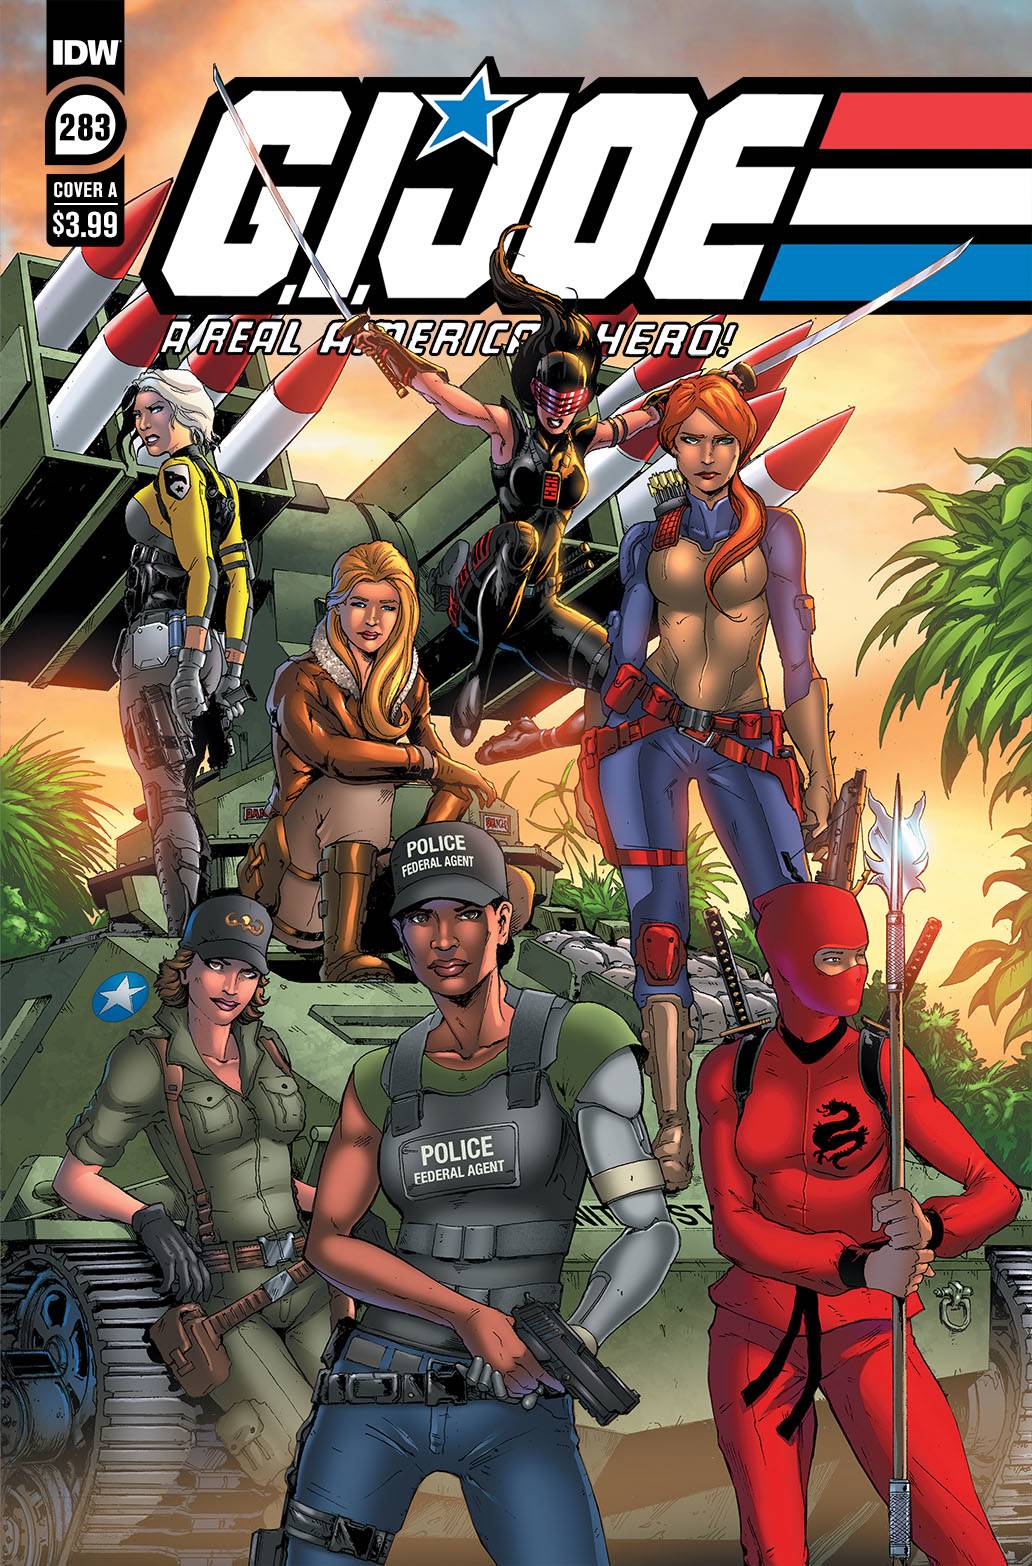 GI JOE A REAL AMERICAN HERO #283 CVR A ANDREW GRIFFITH | Game Master's Emporium (The New GME)